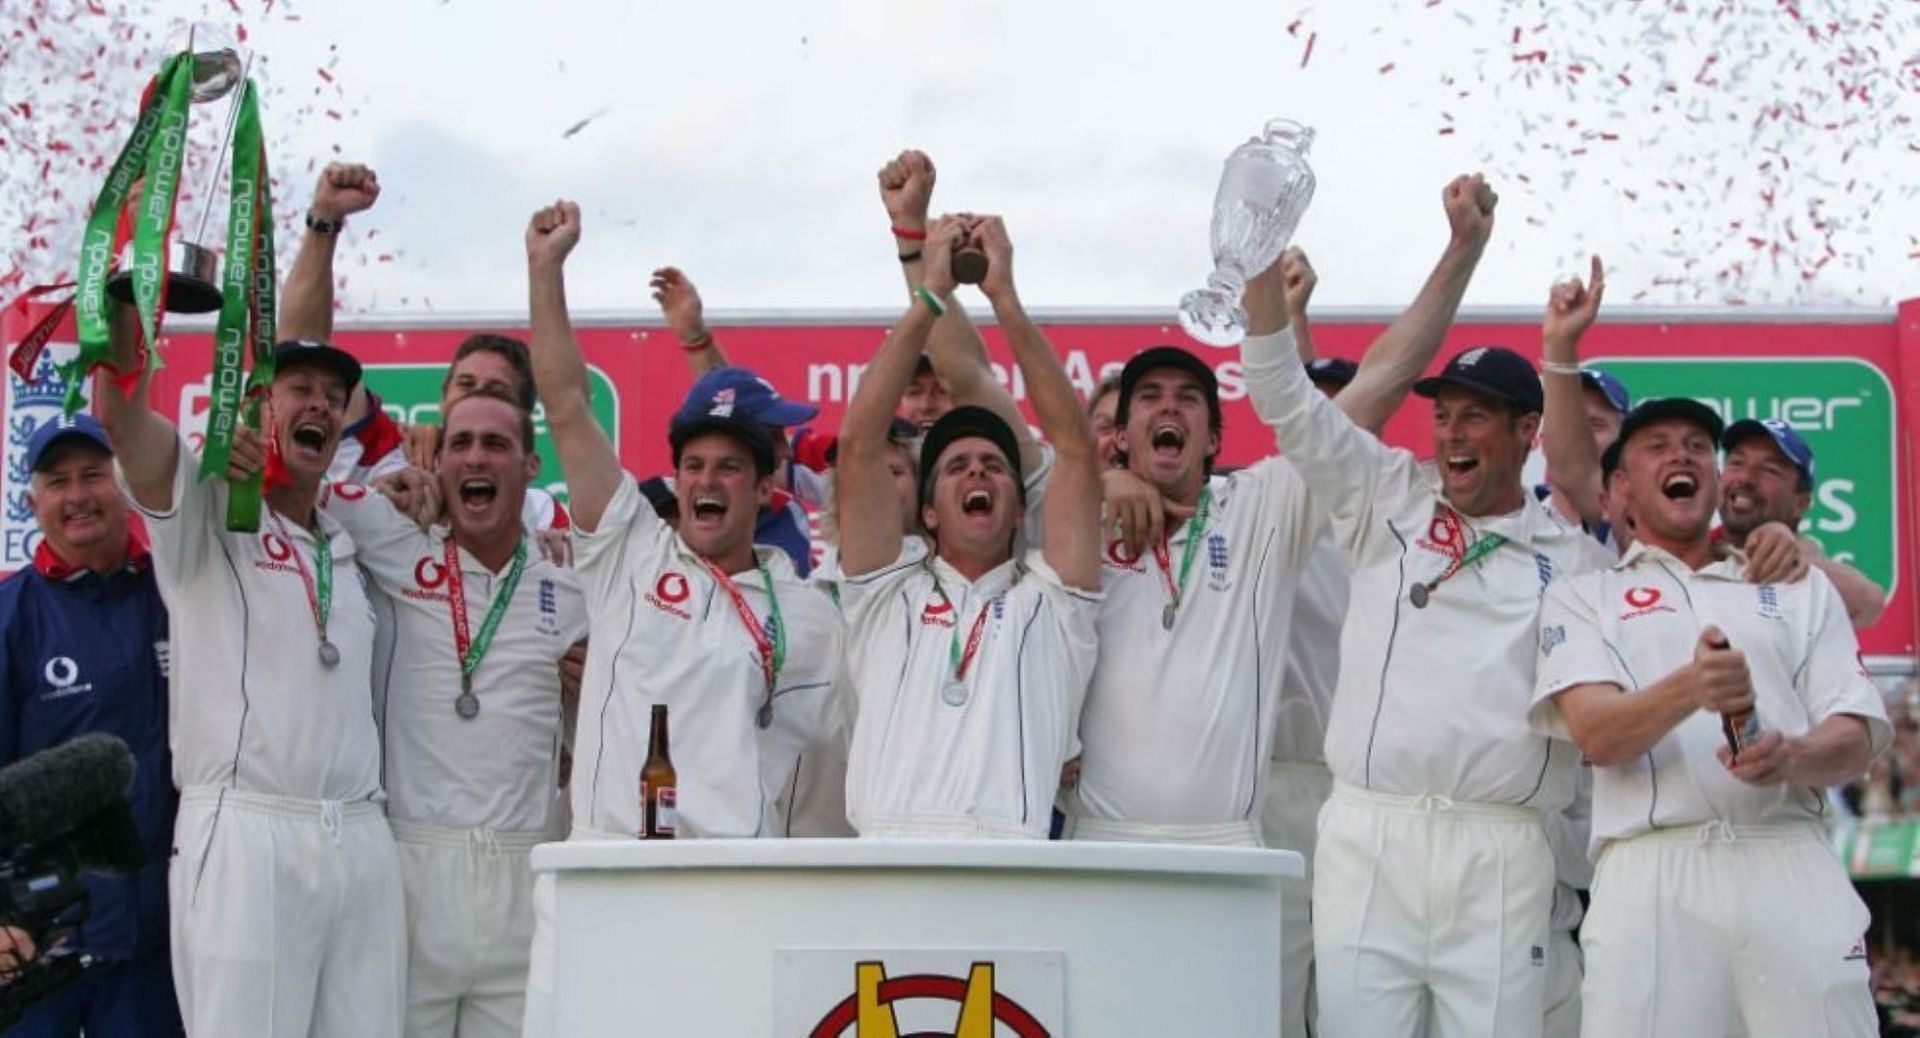 England emerged victorious and regained the Ashes urn in 2005